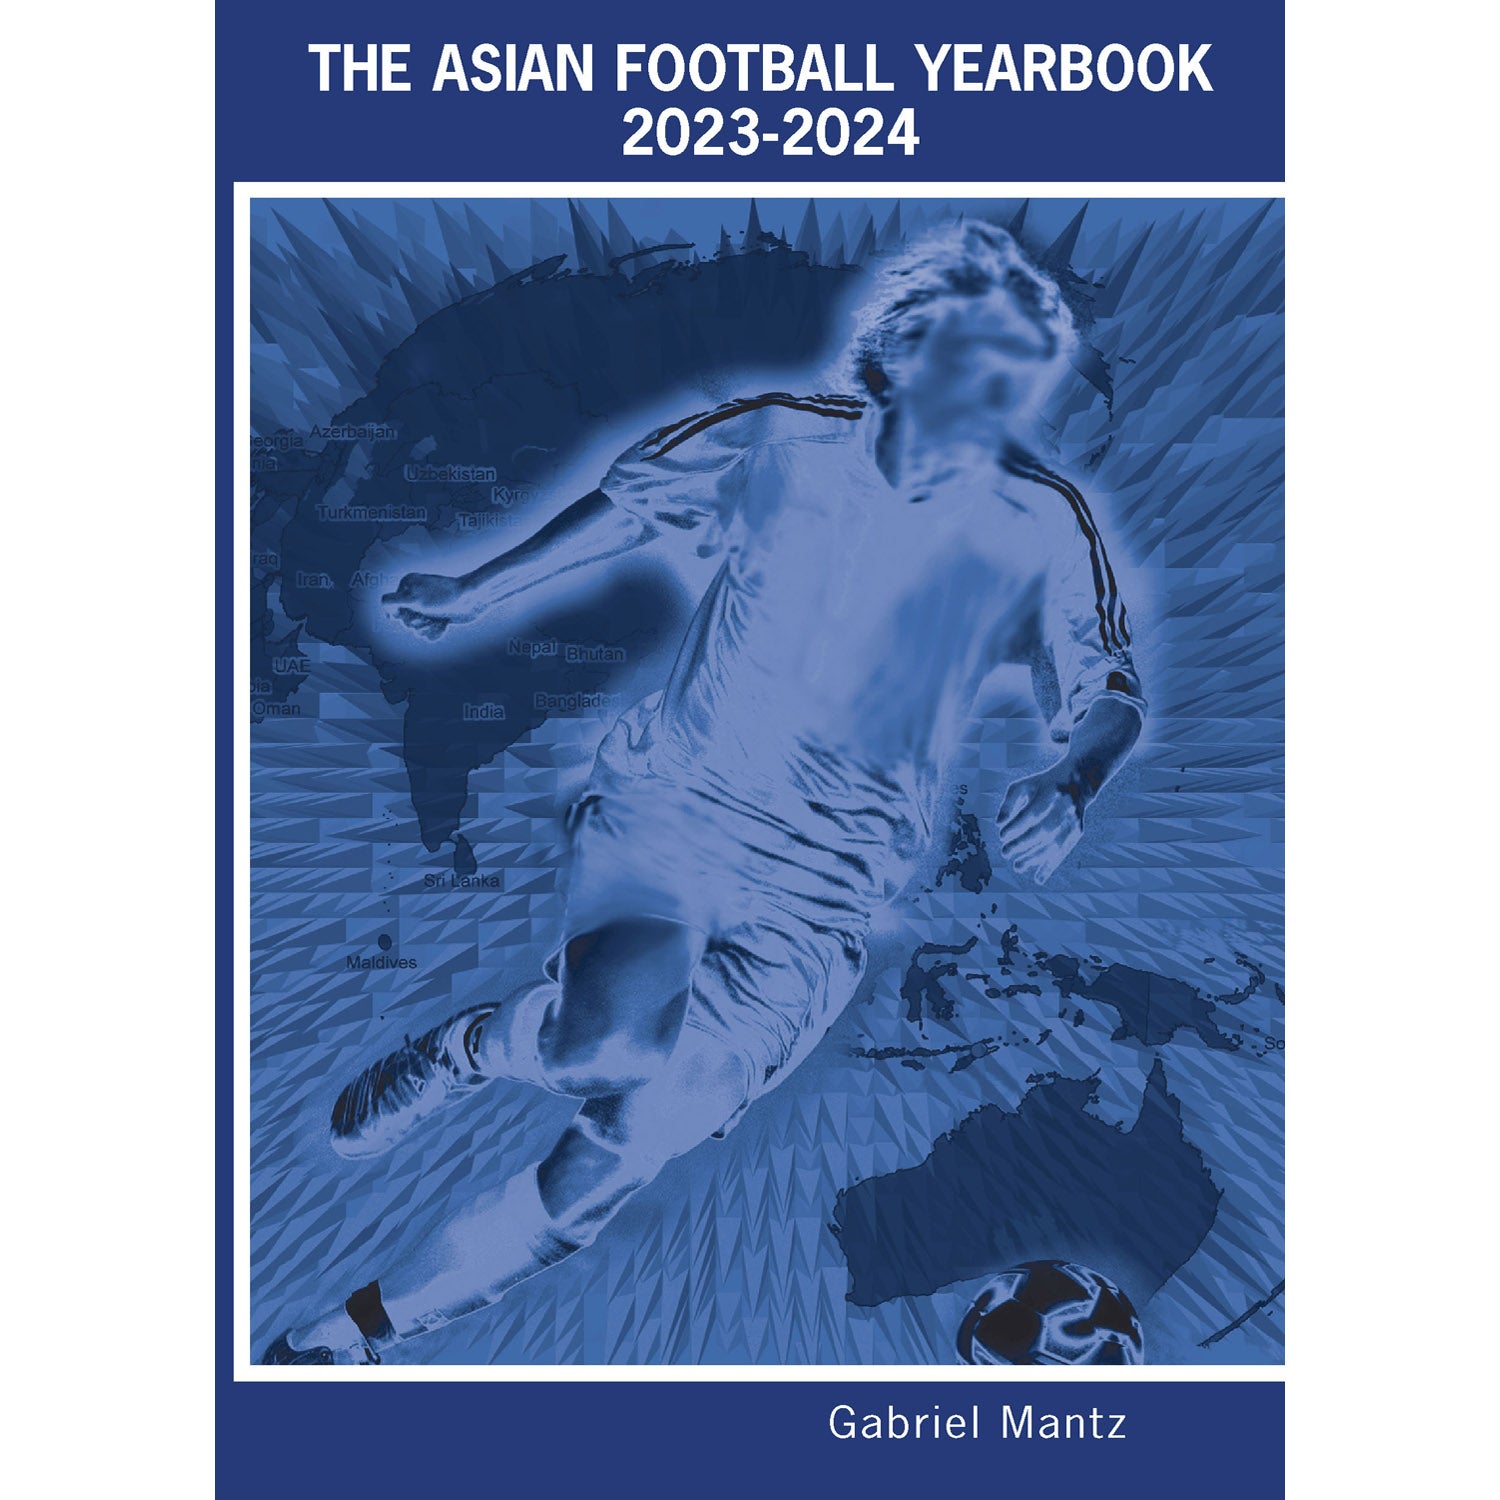 The Asian Football Yearbook 2023-2024